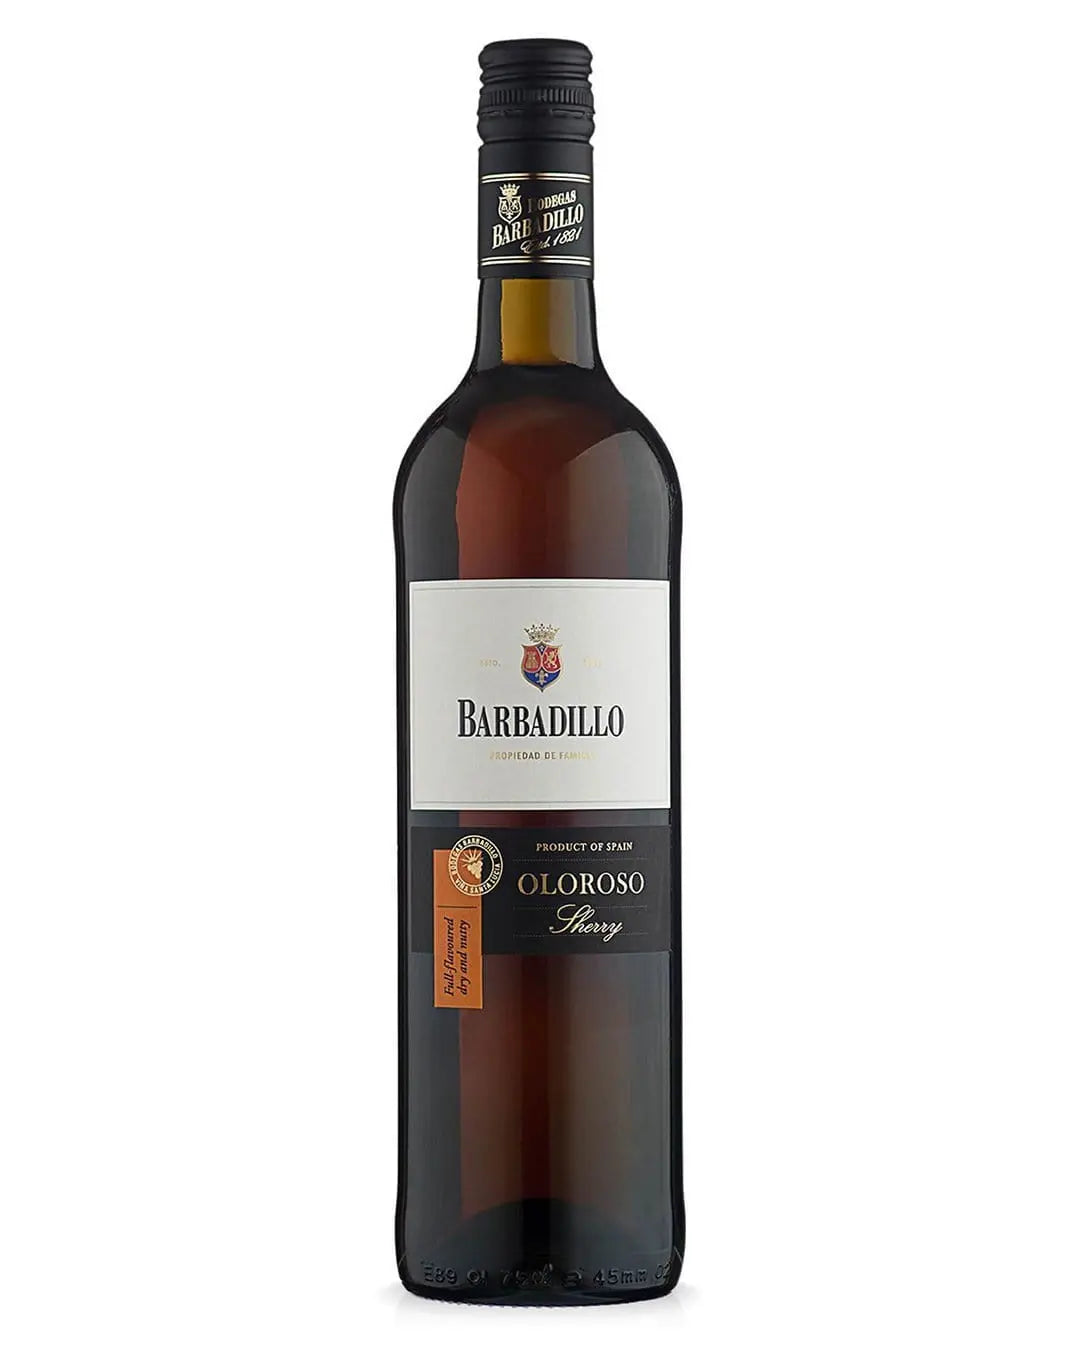 Barbadillo Oloroso Full Dry Sherry, 75 cl Fortified & Other Wines 8410061018036